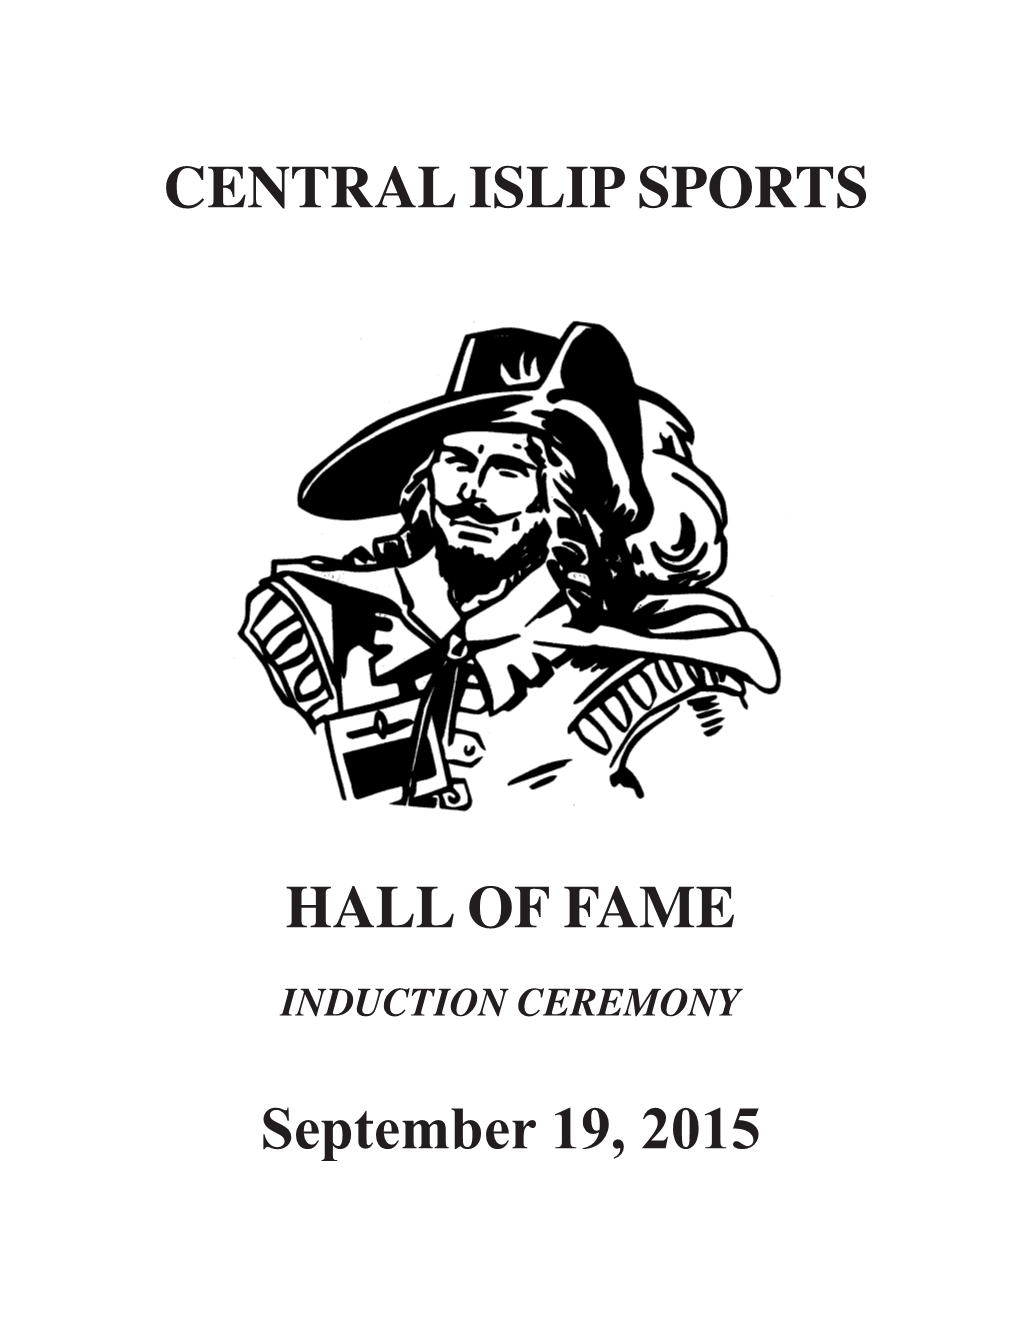 CENTRAL ISLIP SPORTS HALL of FAME September 19, 2015